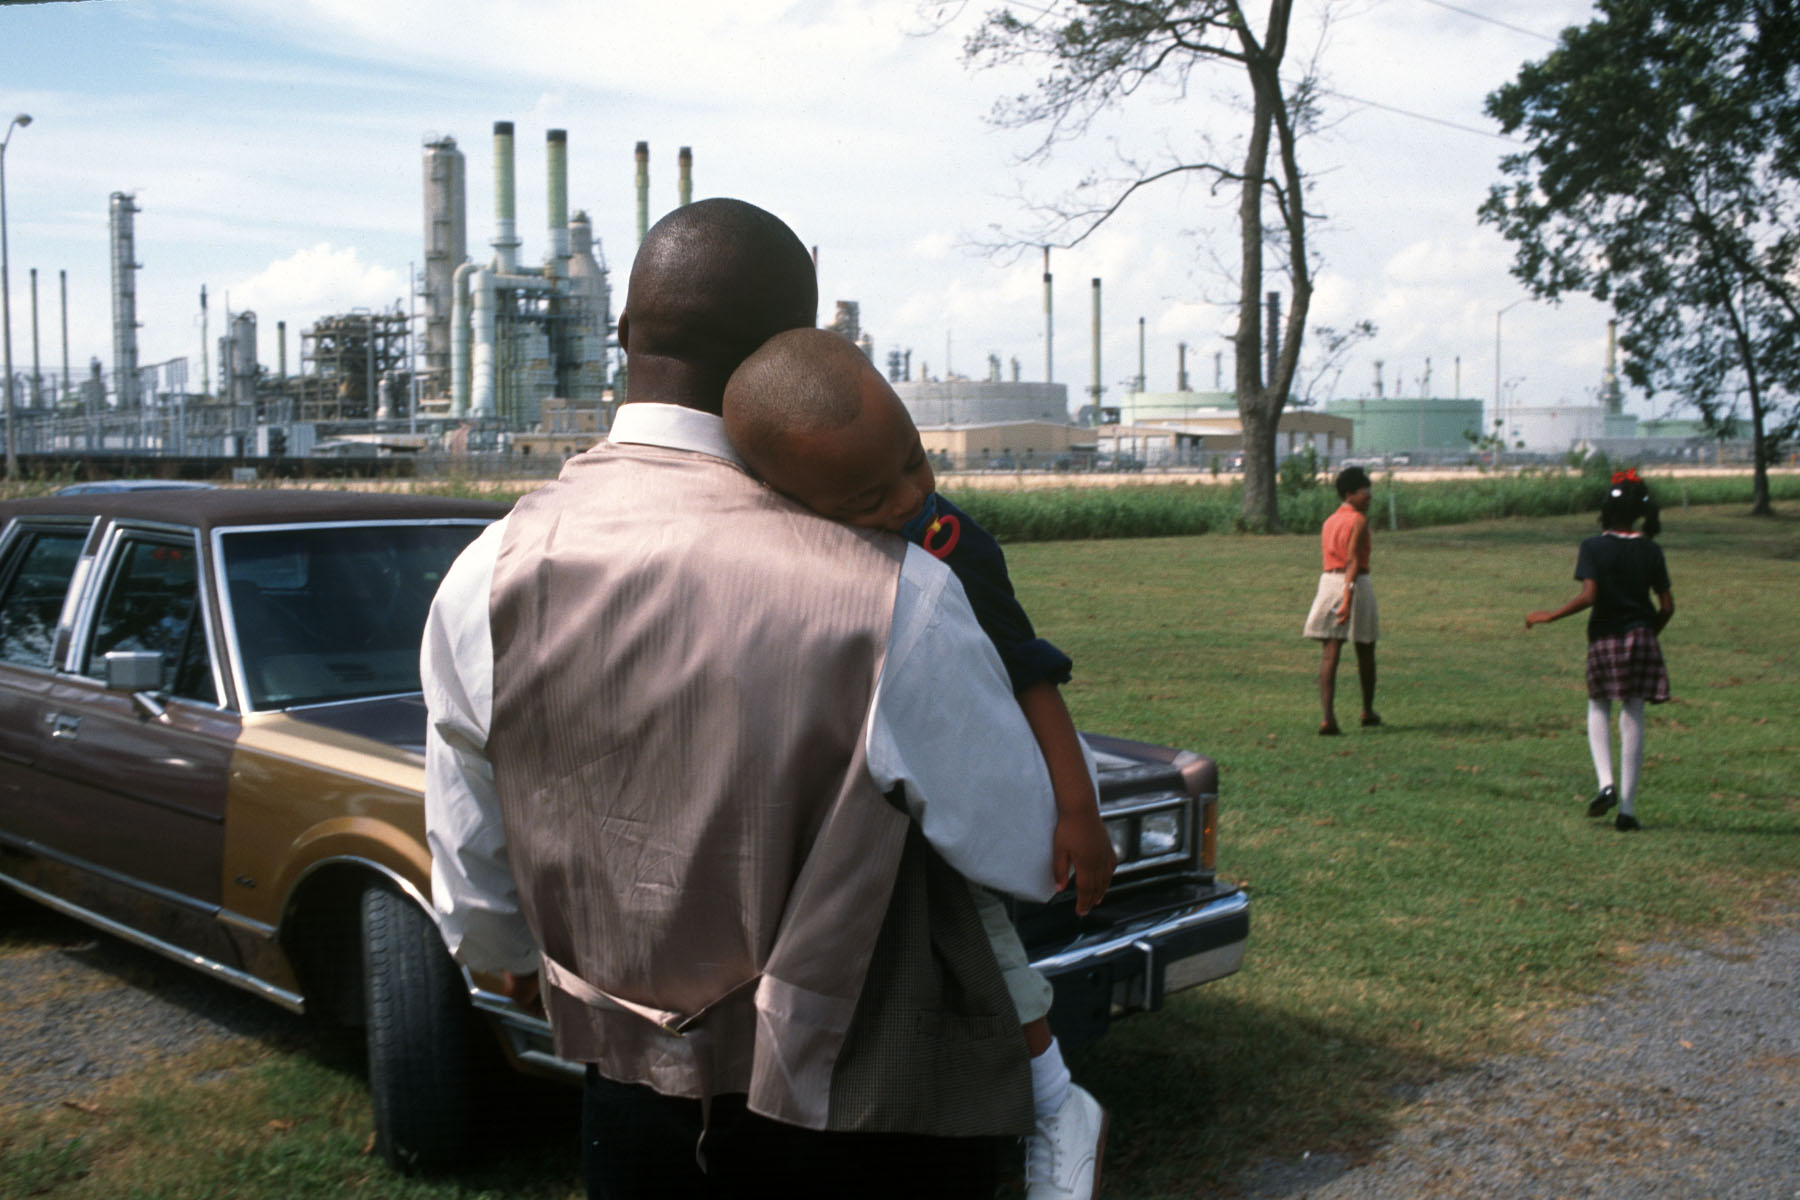 A dad holds his sleeping son as a family leaves Sunday church services surrounded by chemical plants in October of 1998 in Lions, Louisiana.